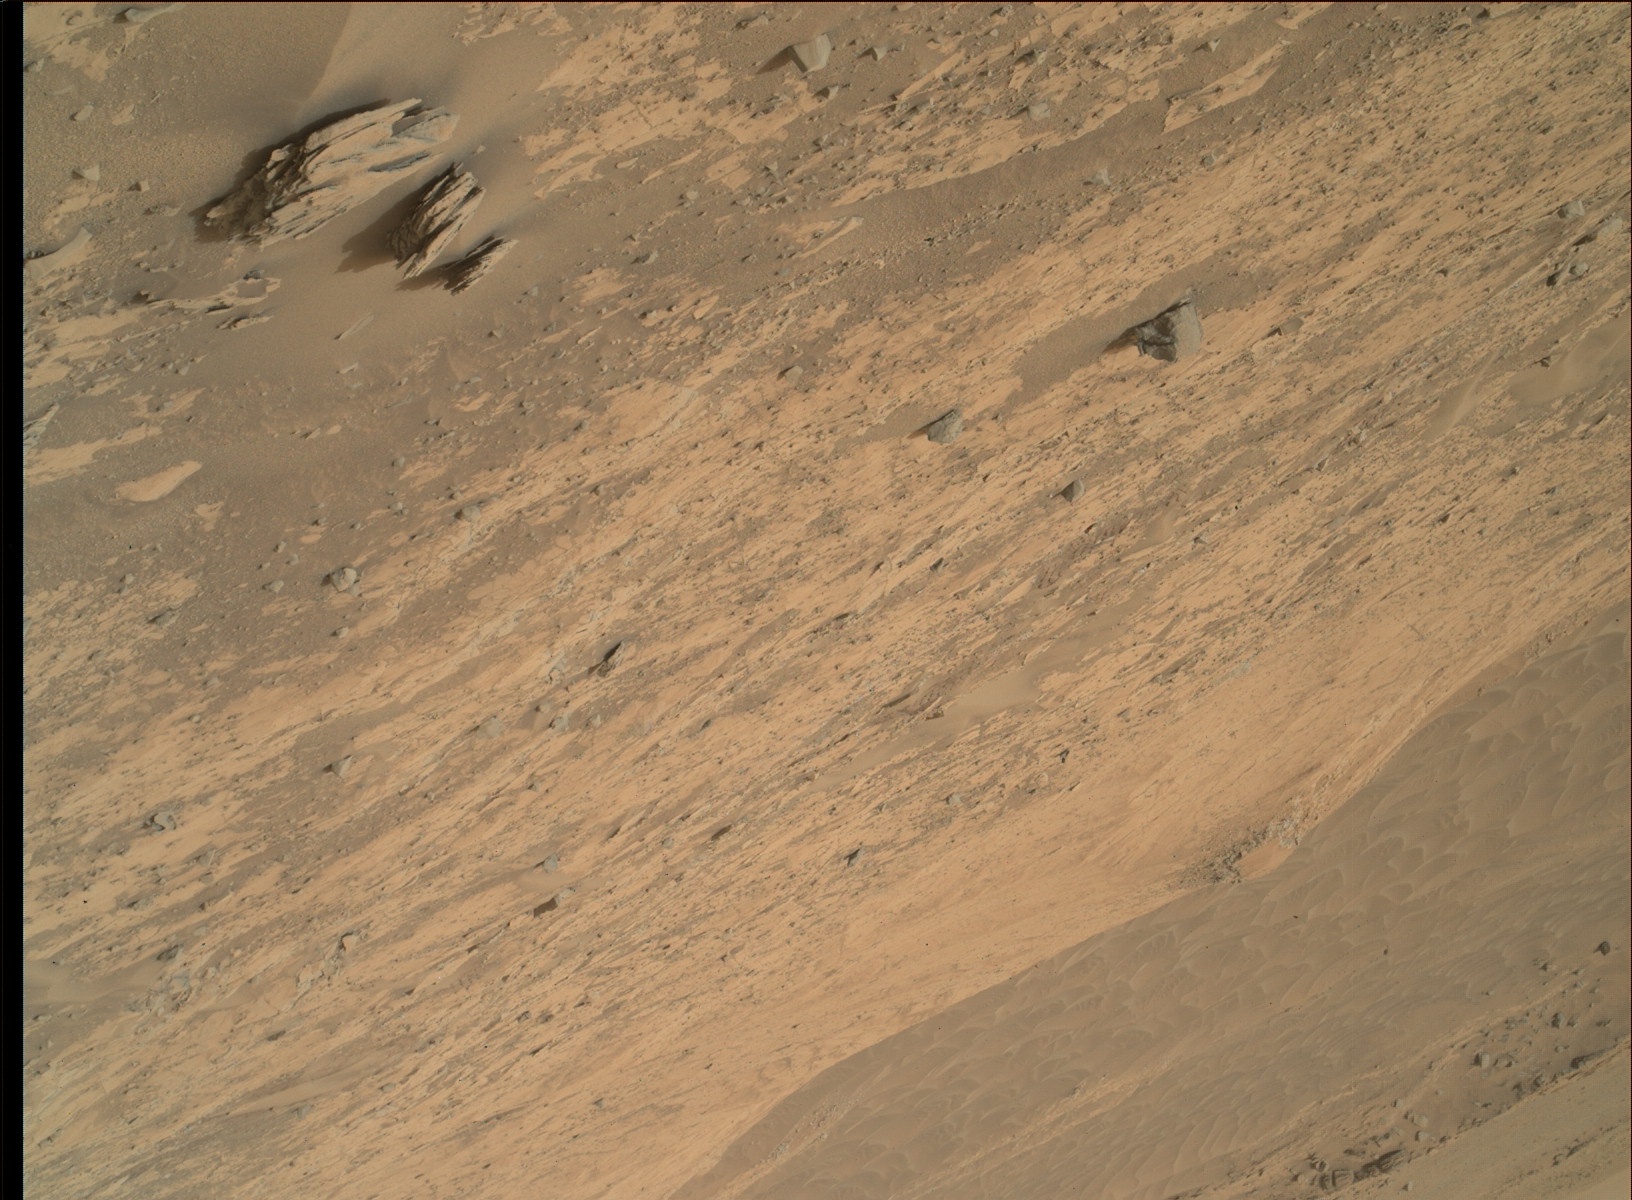 Nasa's Mars rover Curiosity acquired this image using its Mars Hand Lens Imager (MAHLI) on Sol 837